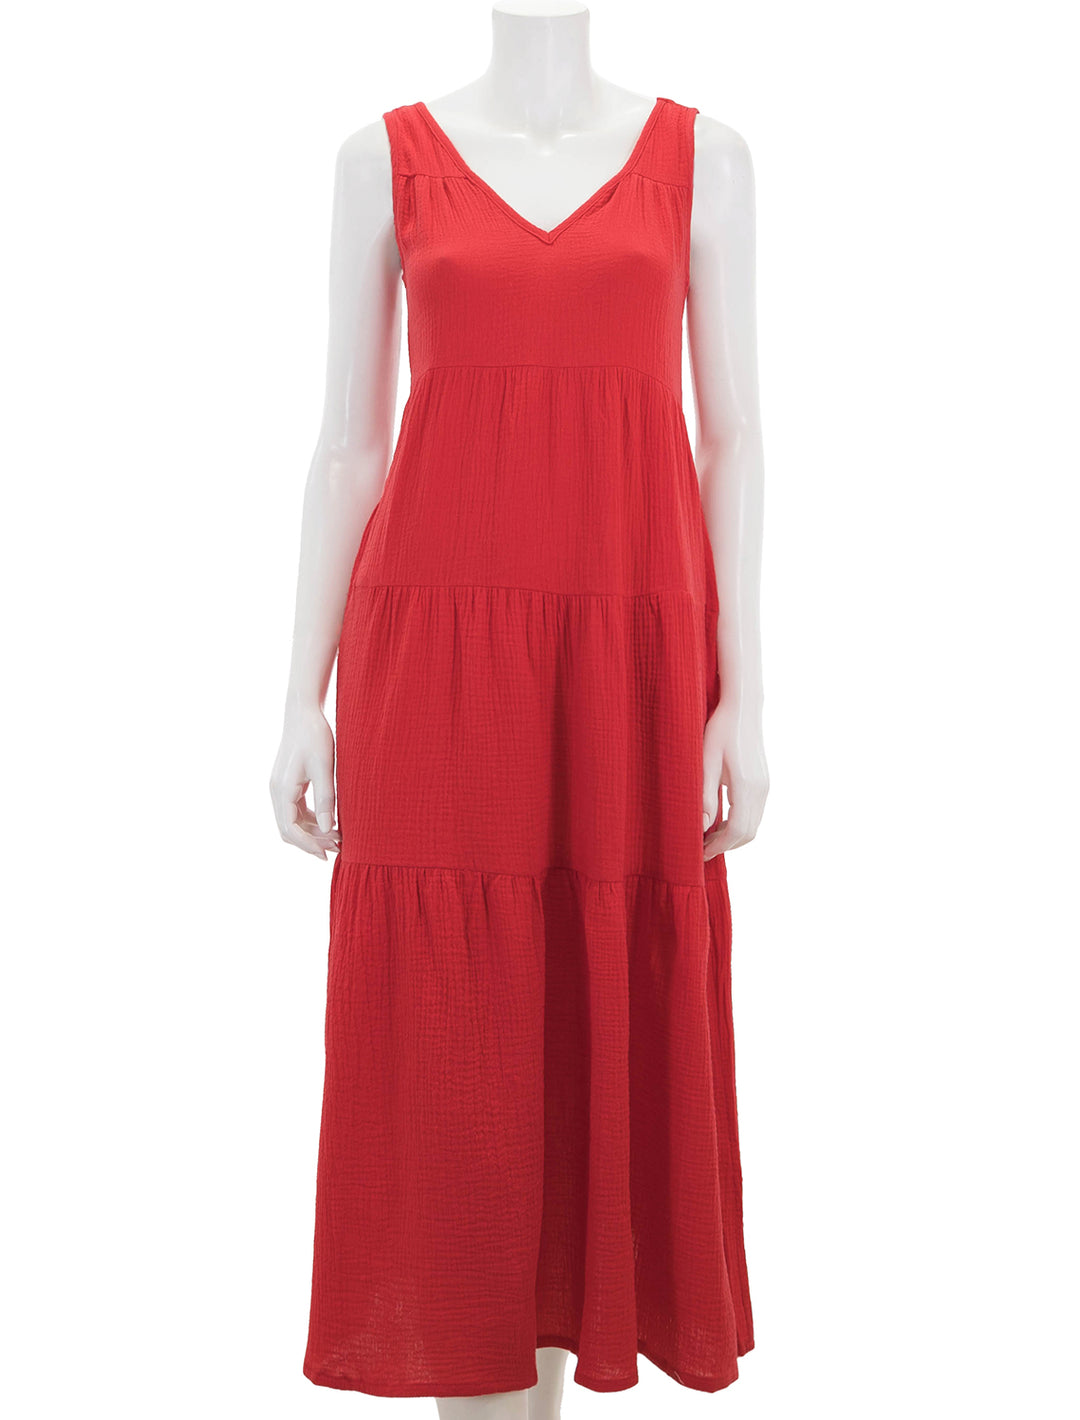 Front view of Marine Layer's corinne maxi dress in red.